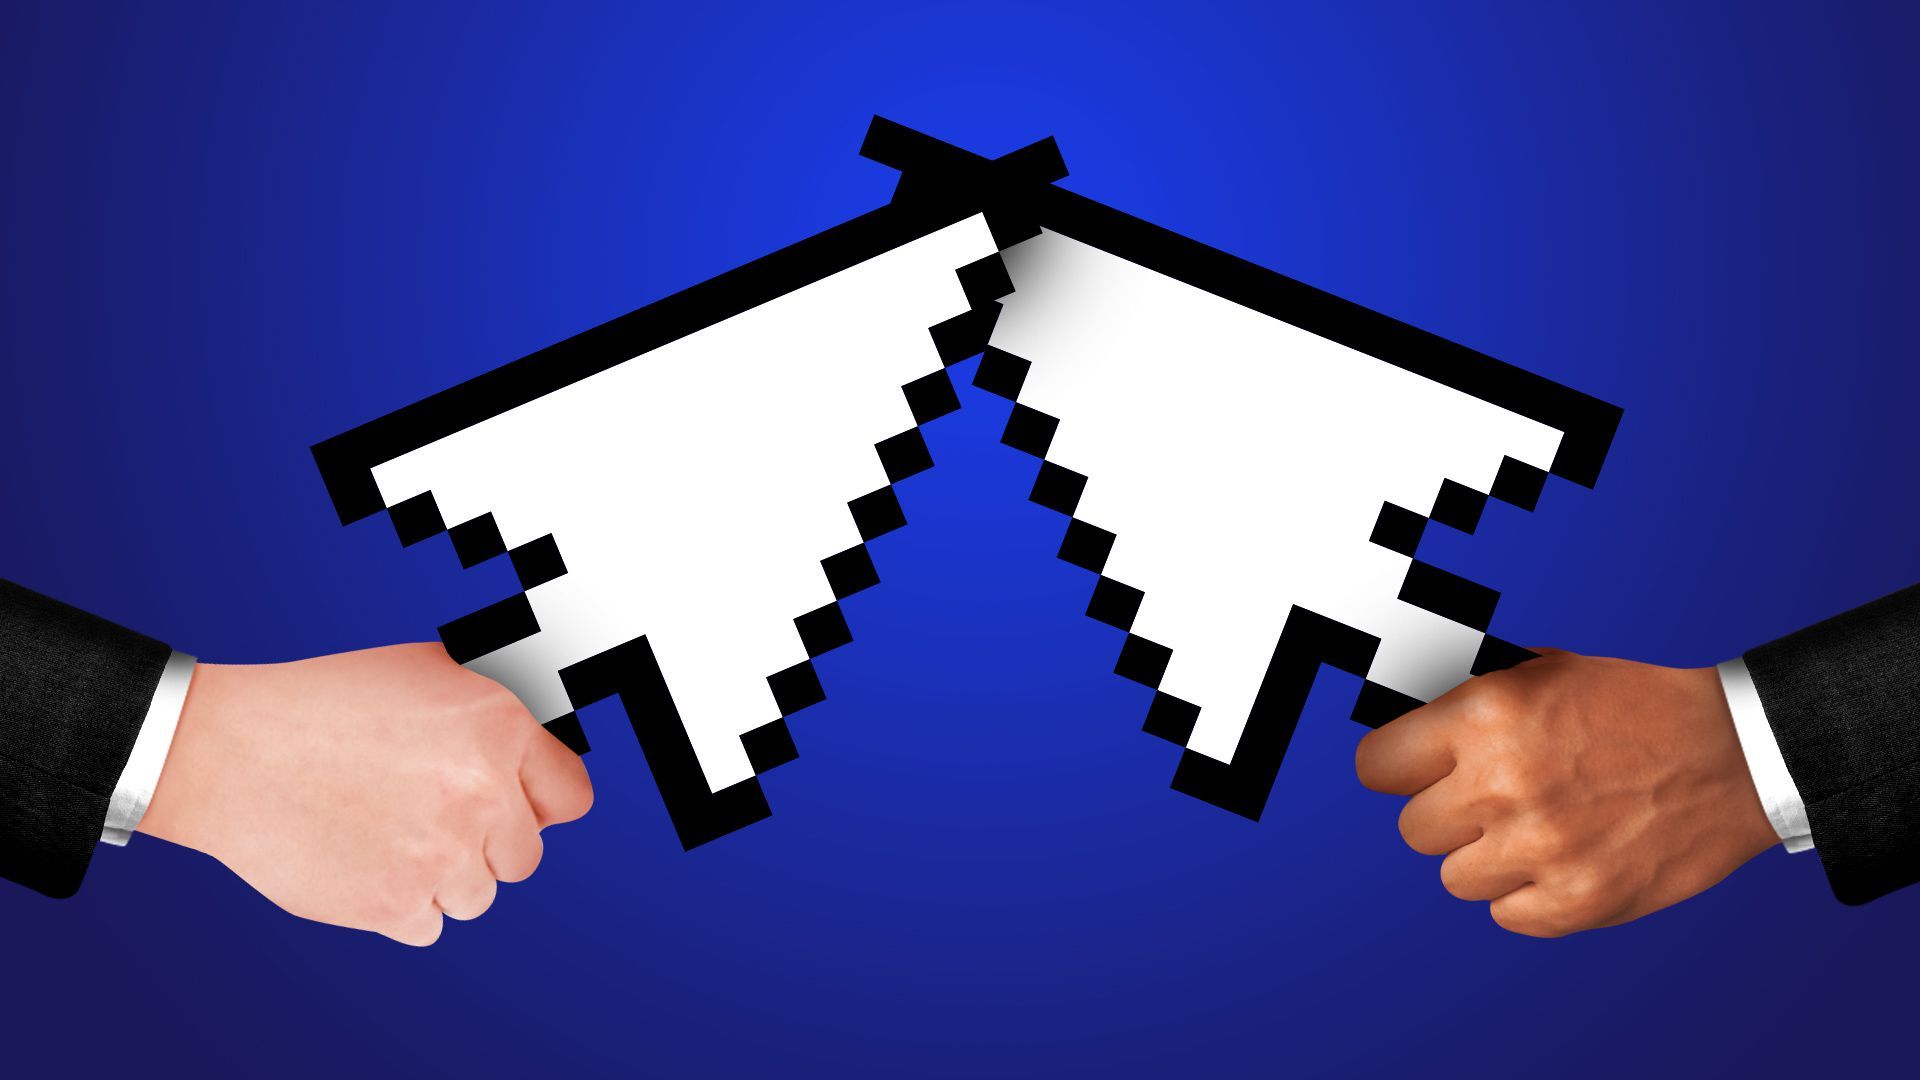 Illustration of two hand dueling with cursors.